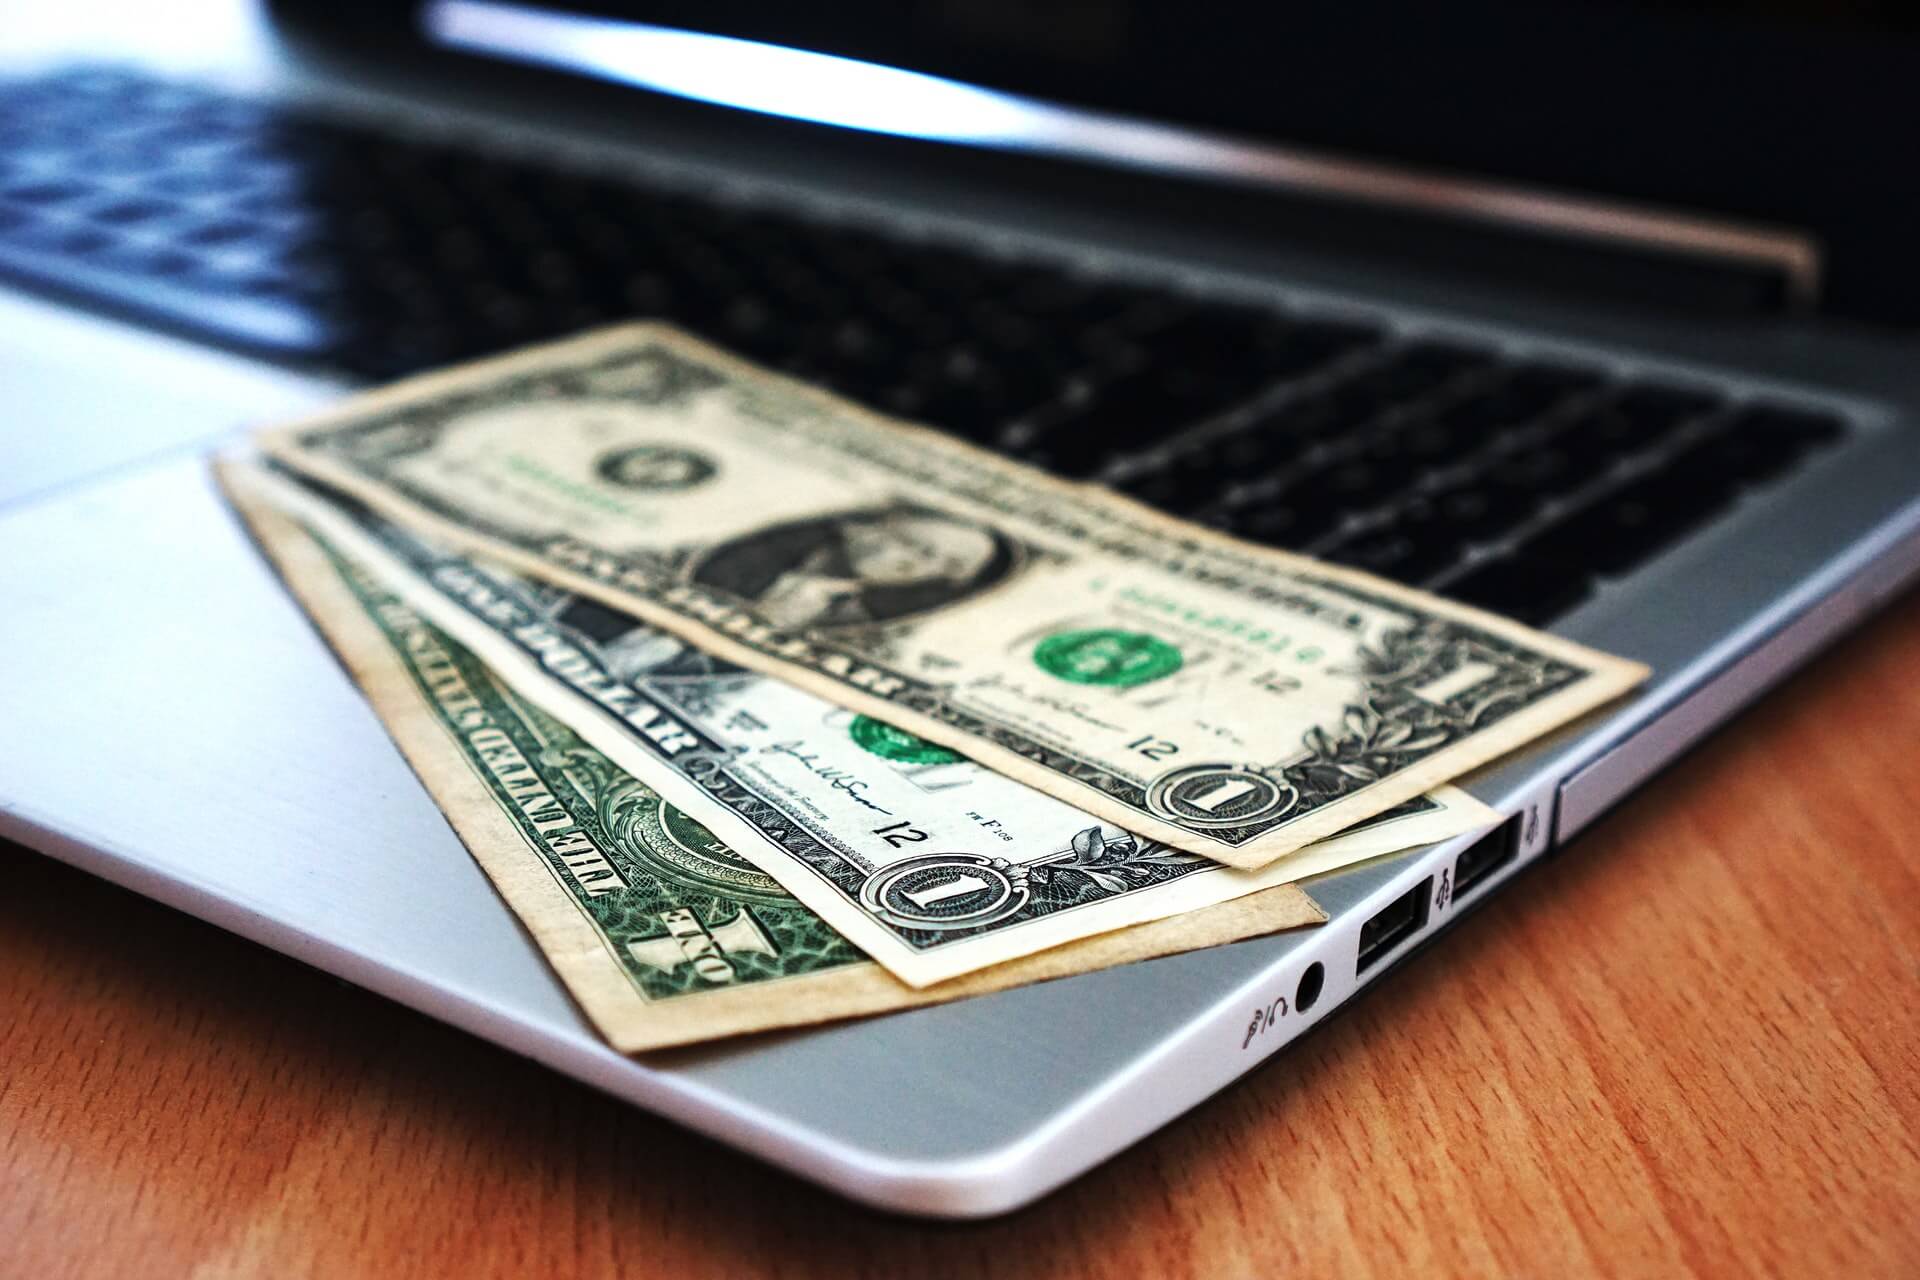 What No One is Telling You About Making Quick Money Online